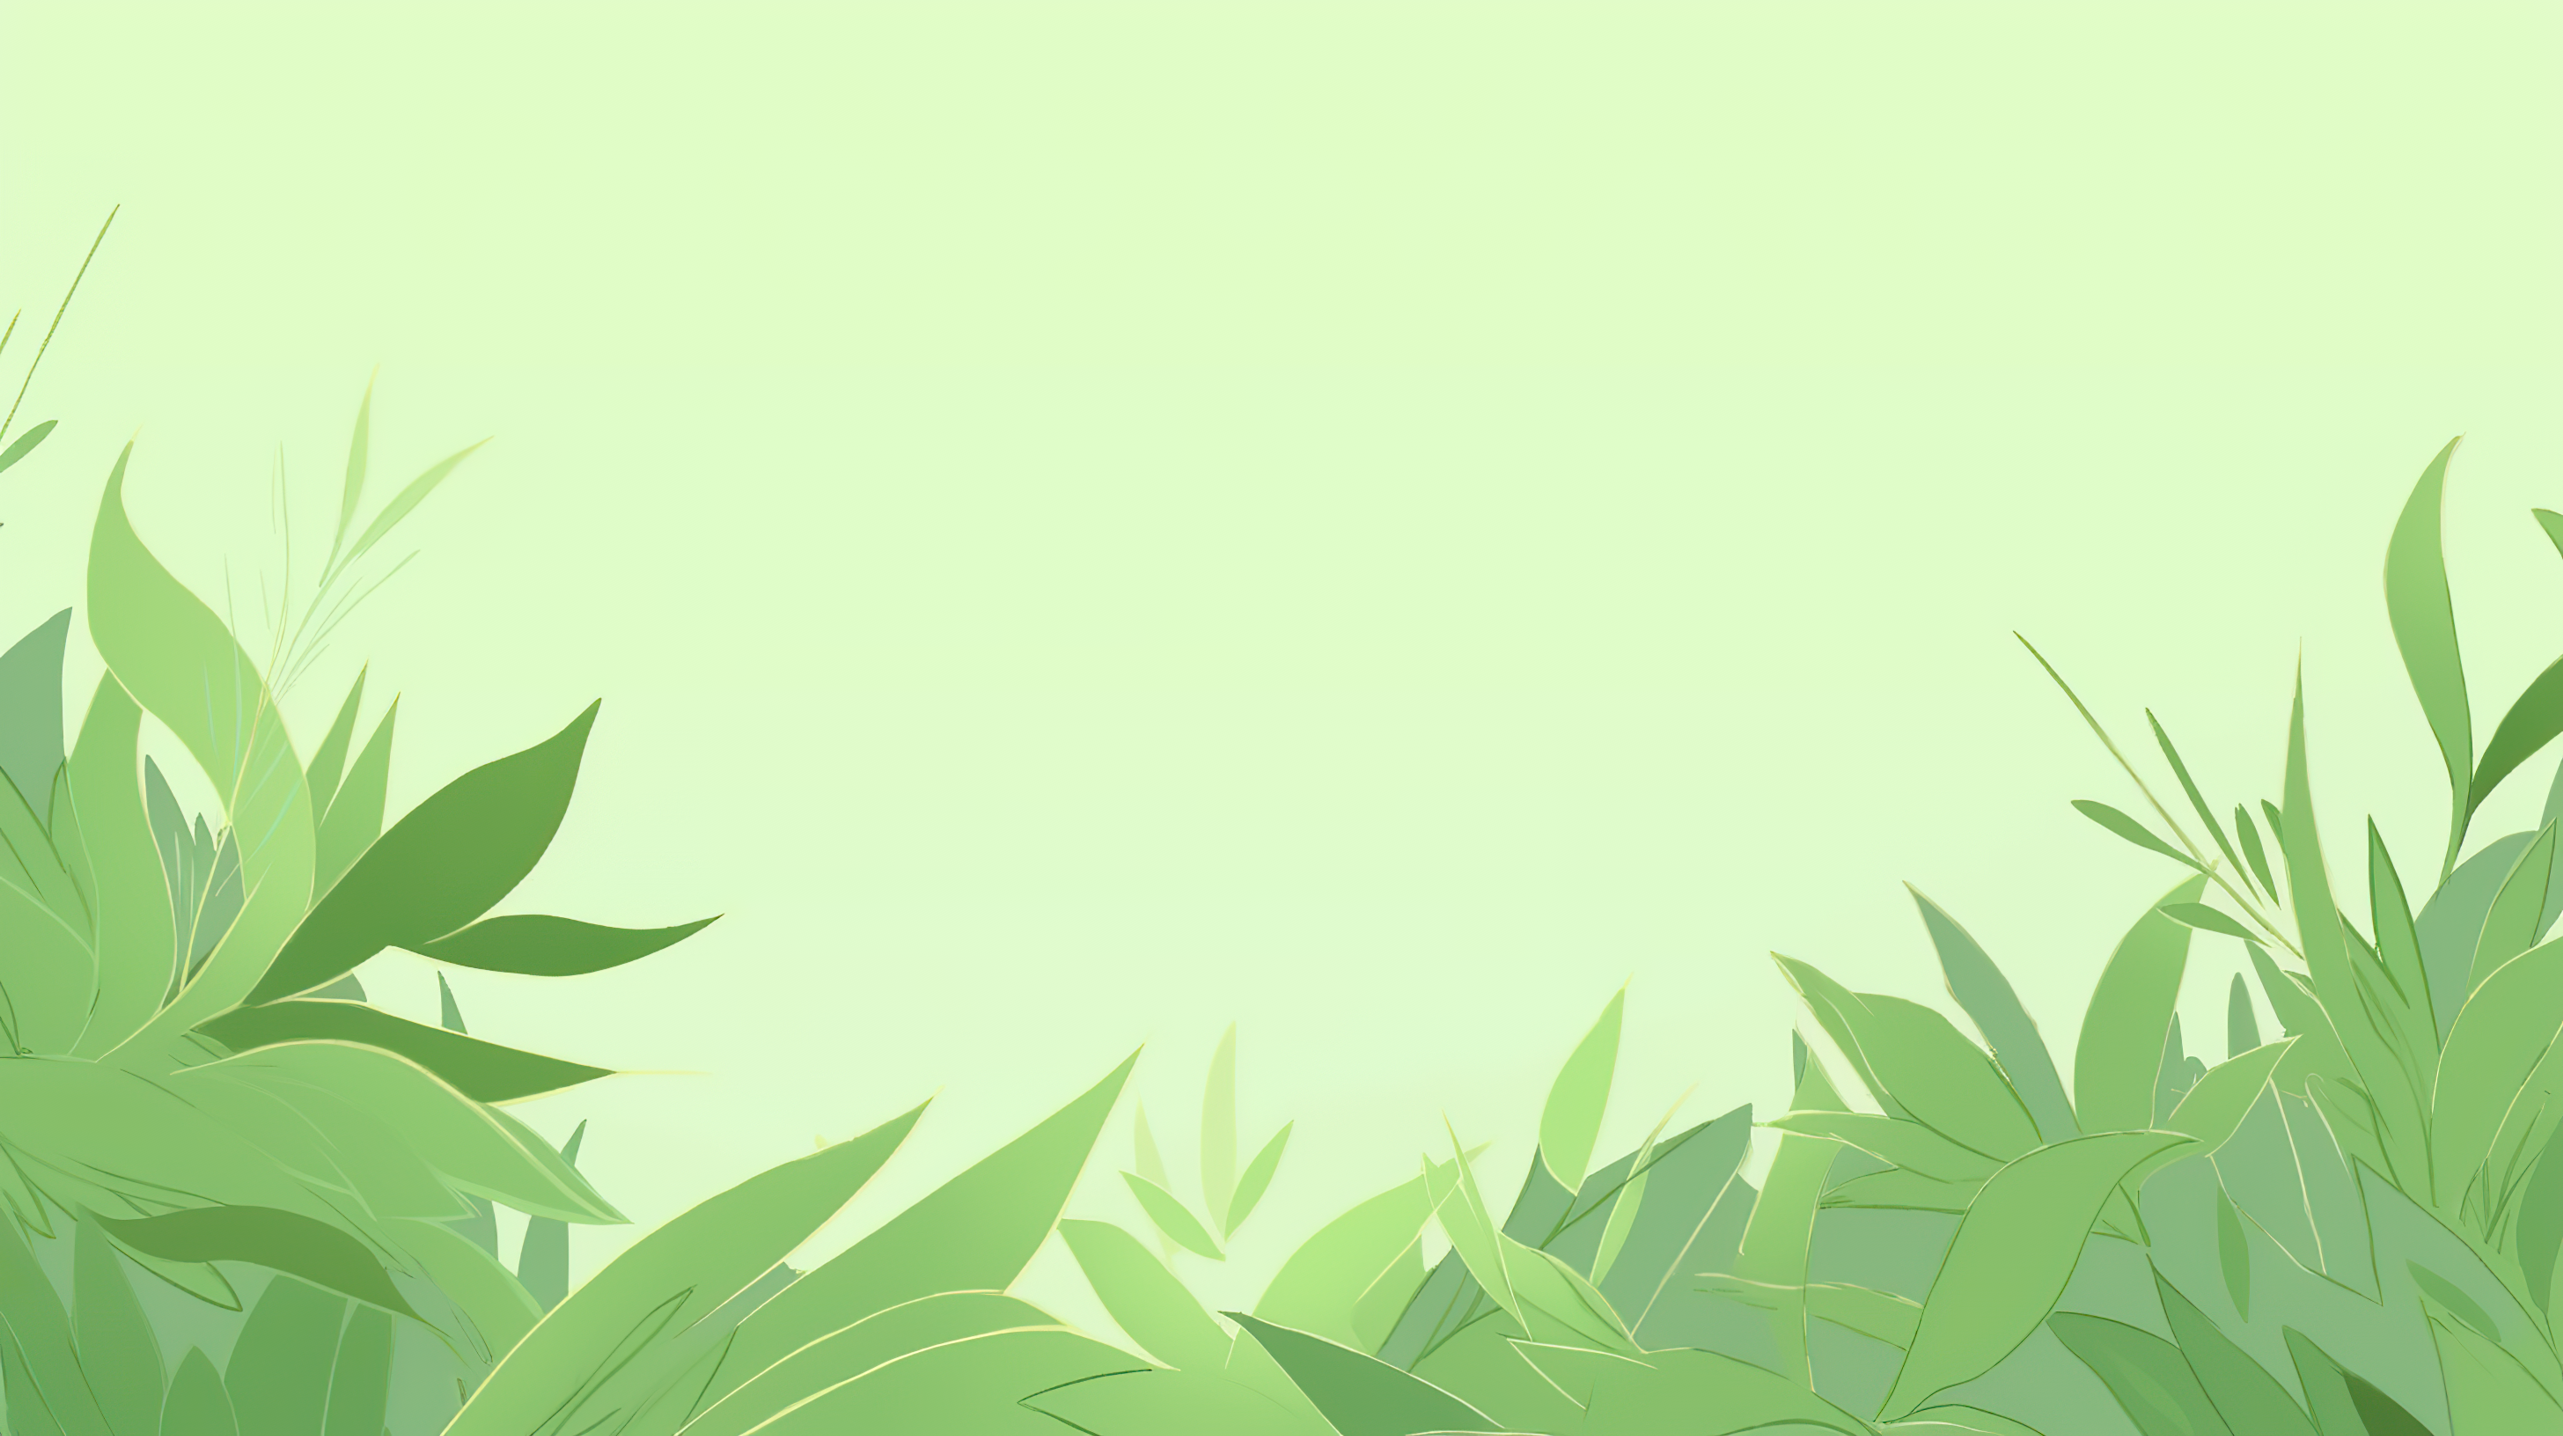 HD desktop wallpaper featuring a green aesthetic with subtle leaf motifs ideal for a calming background.